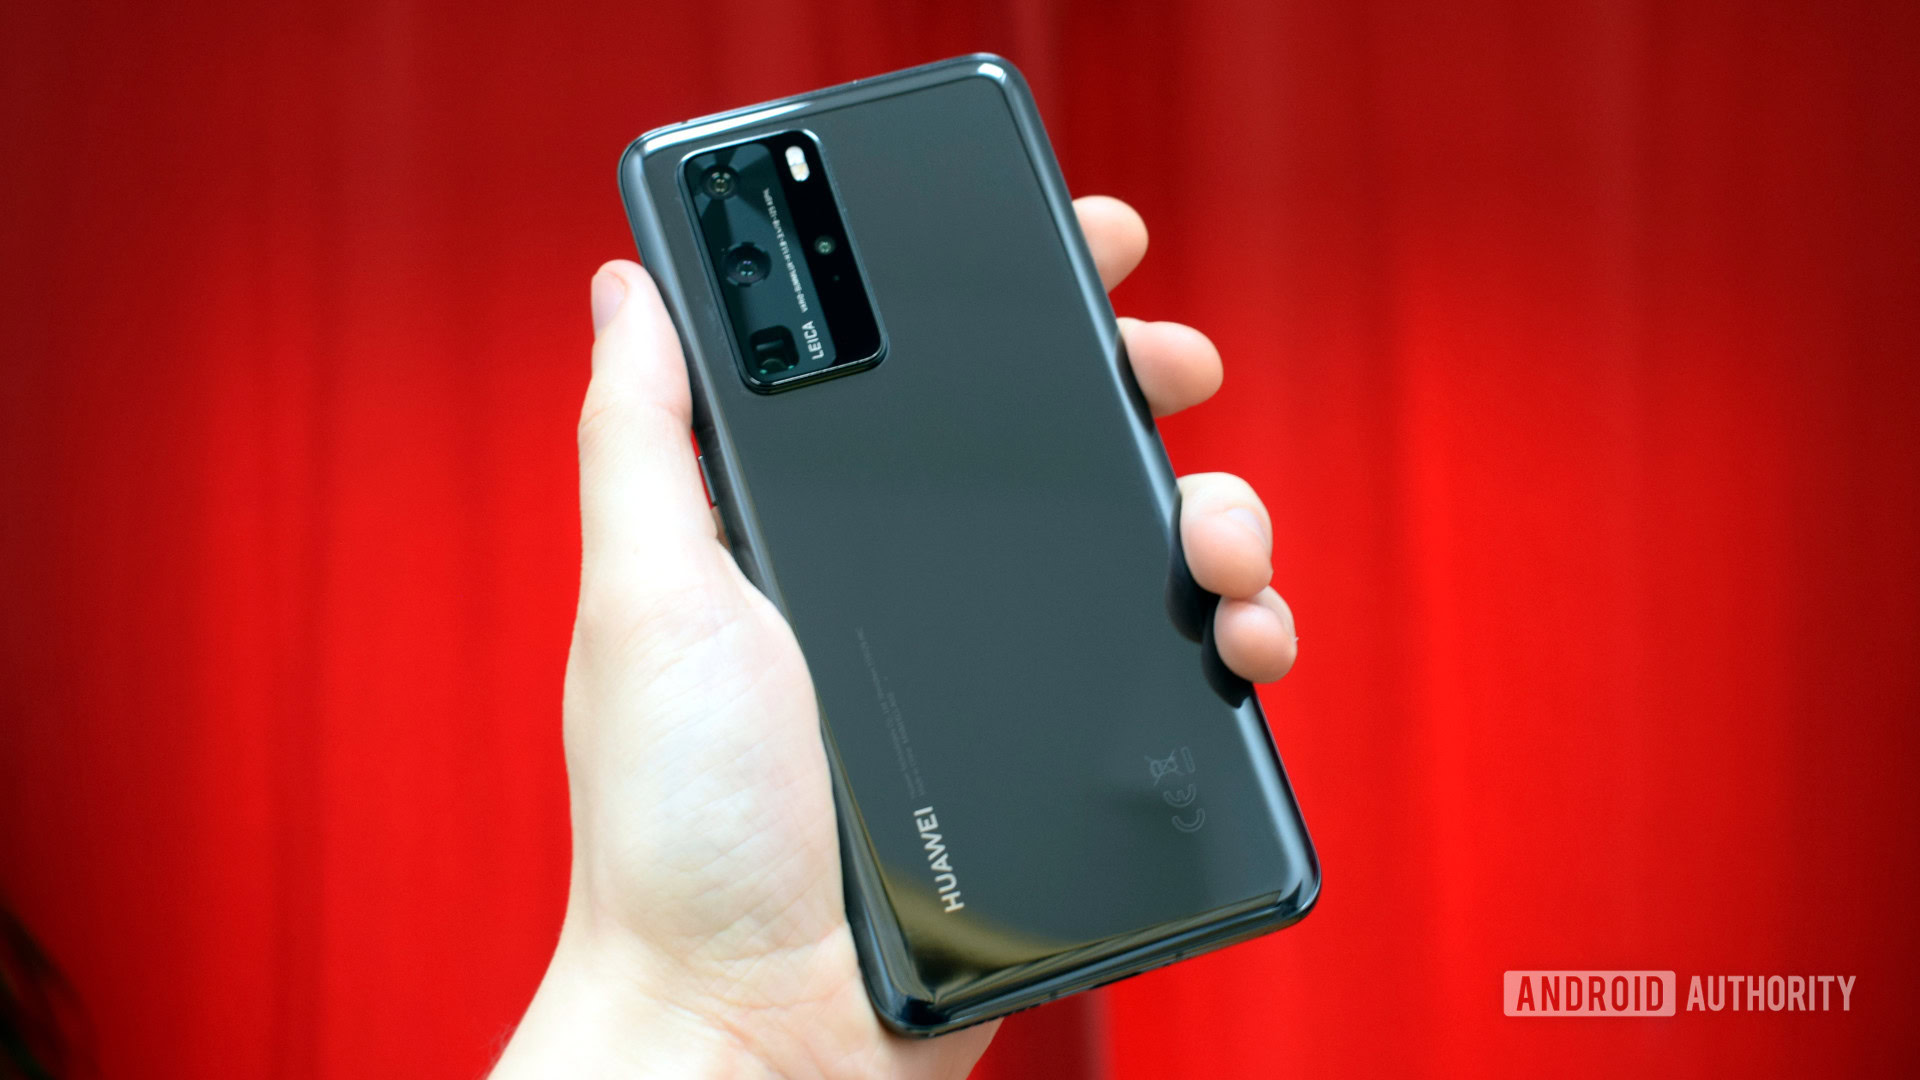 HUAWEI P40 Pro long-term review: Last call for HUAWEI's Western dream